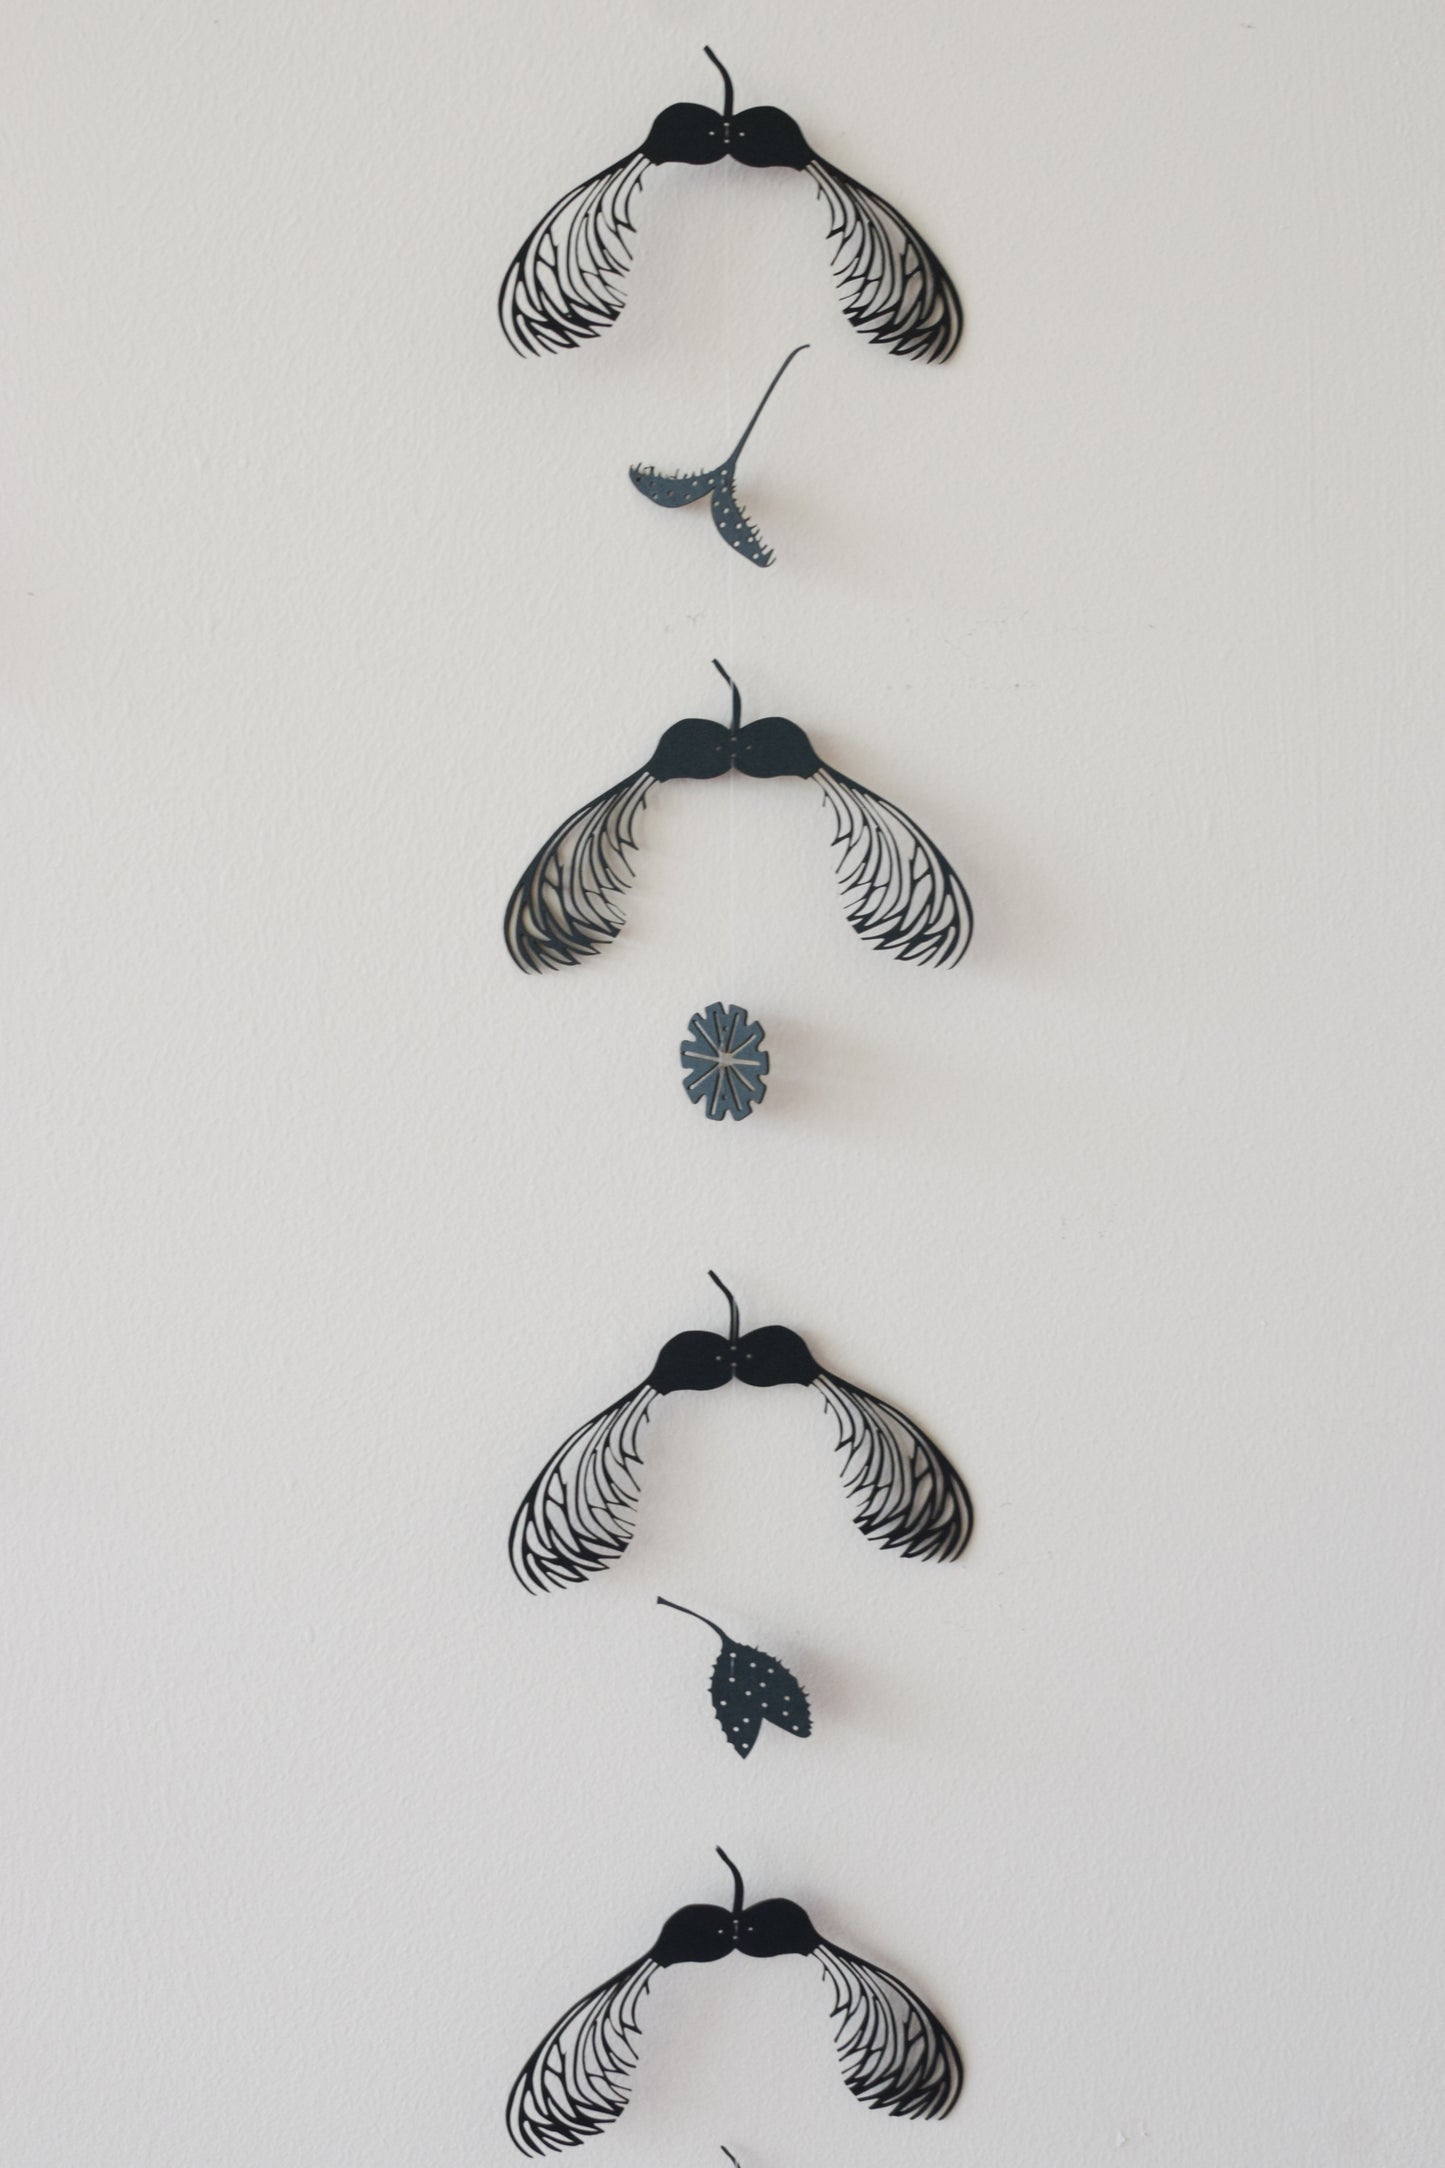 Sycamore Seed hanging decoration